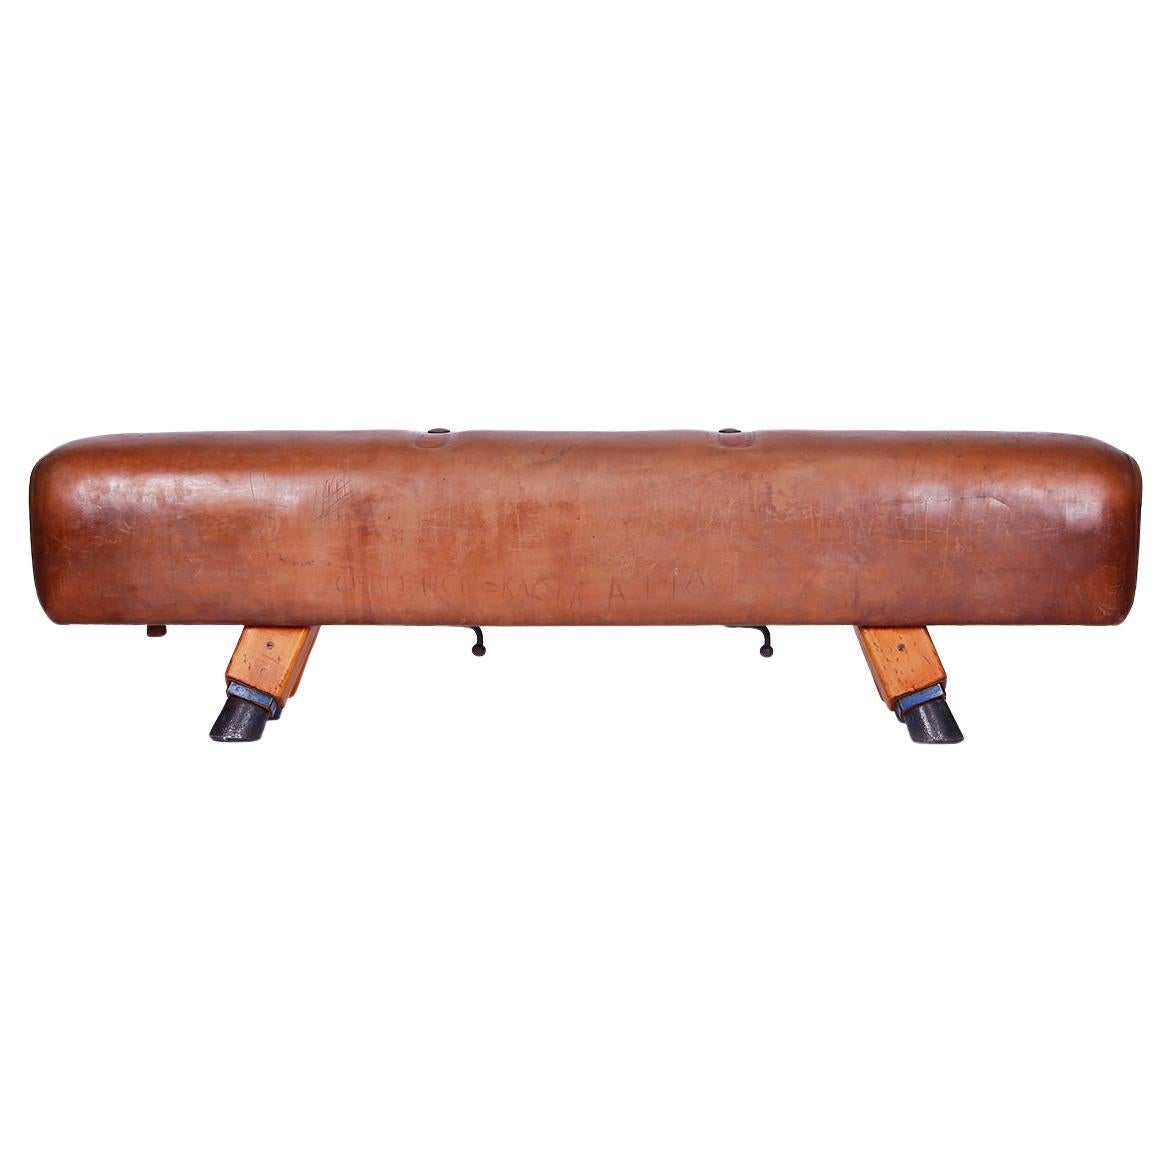 Gymnastic Leather Pommel Horse Bench Top, 1930s For Sale